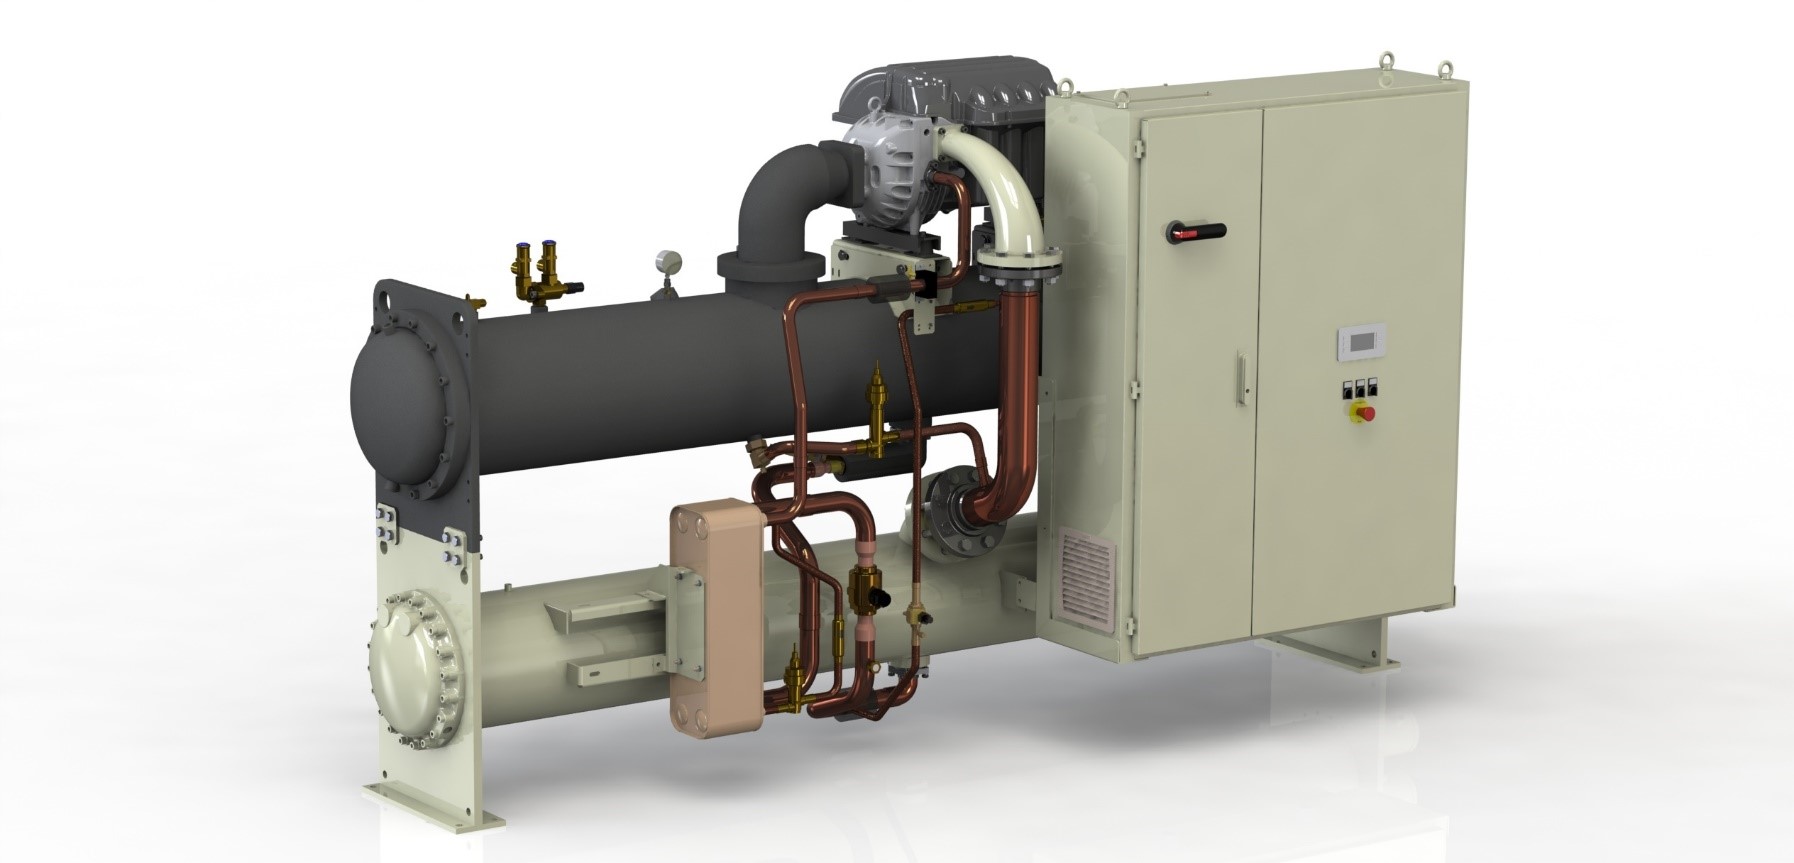 Daikin Applied introduces innovative new oil-free chiller